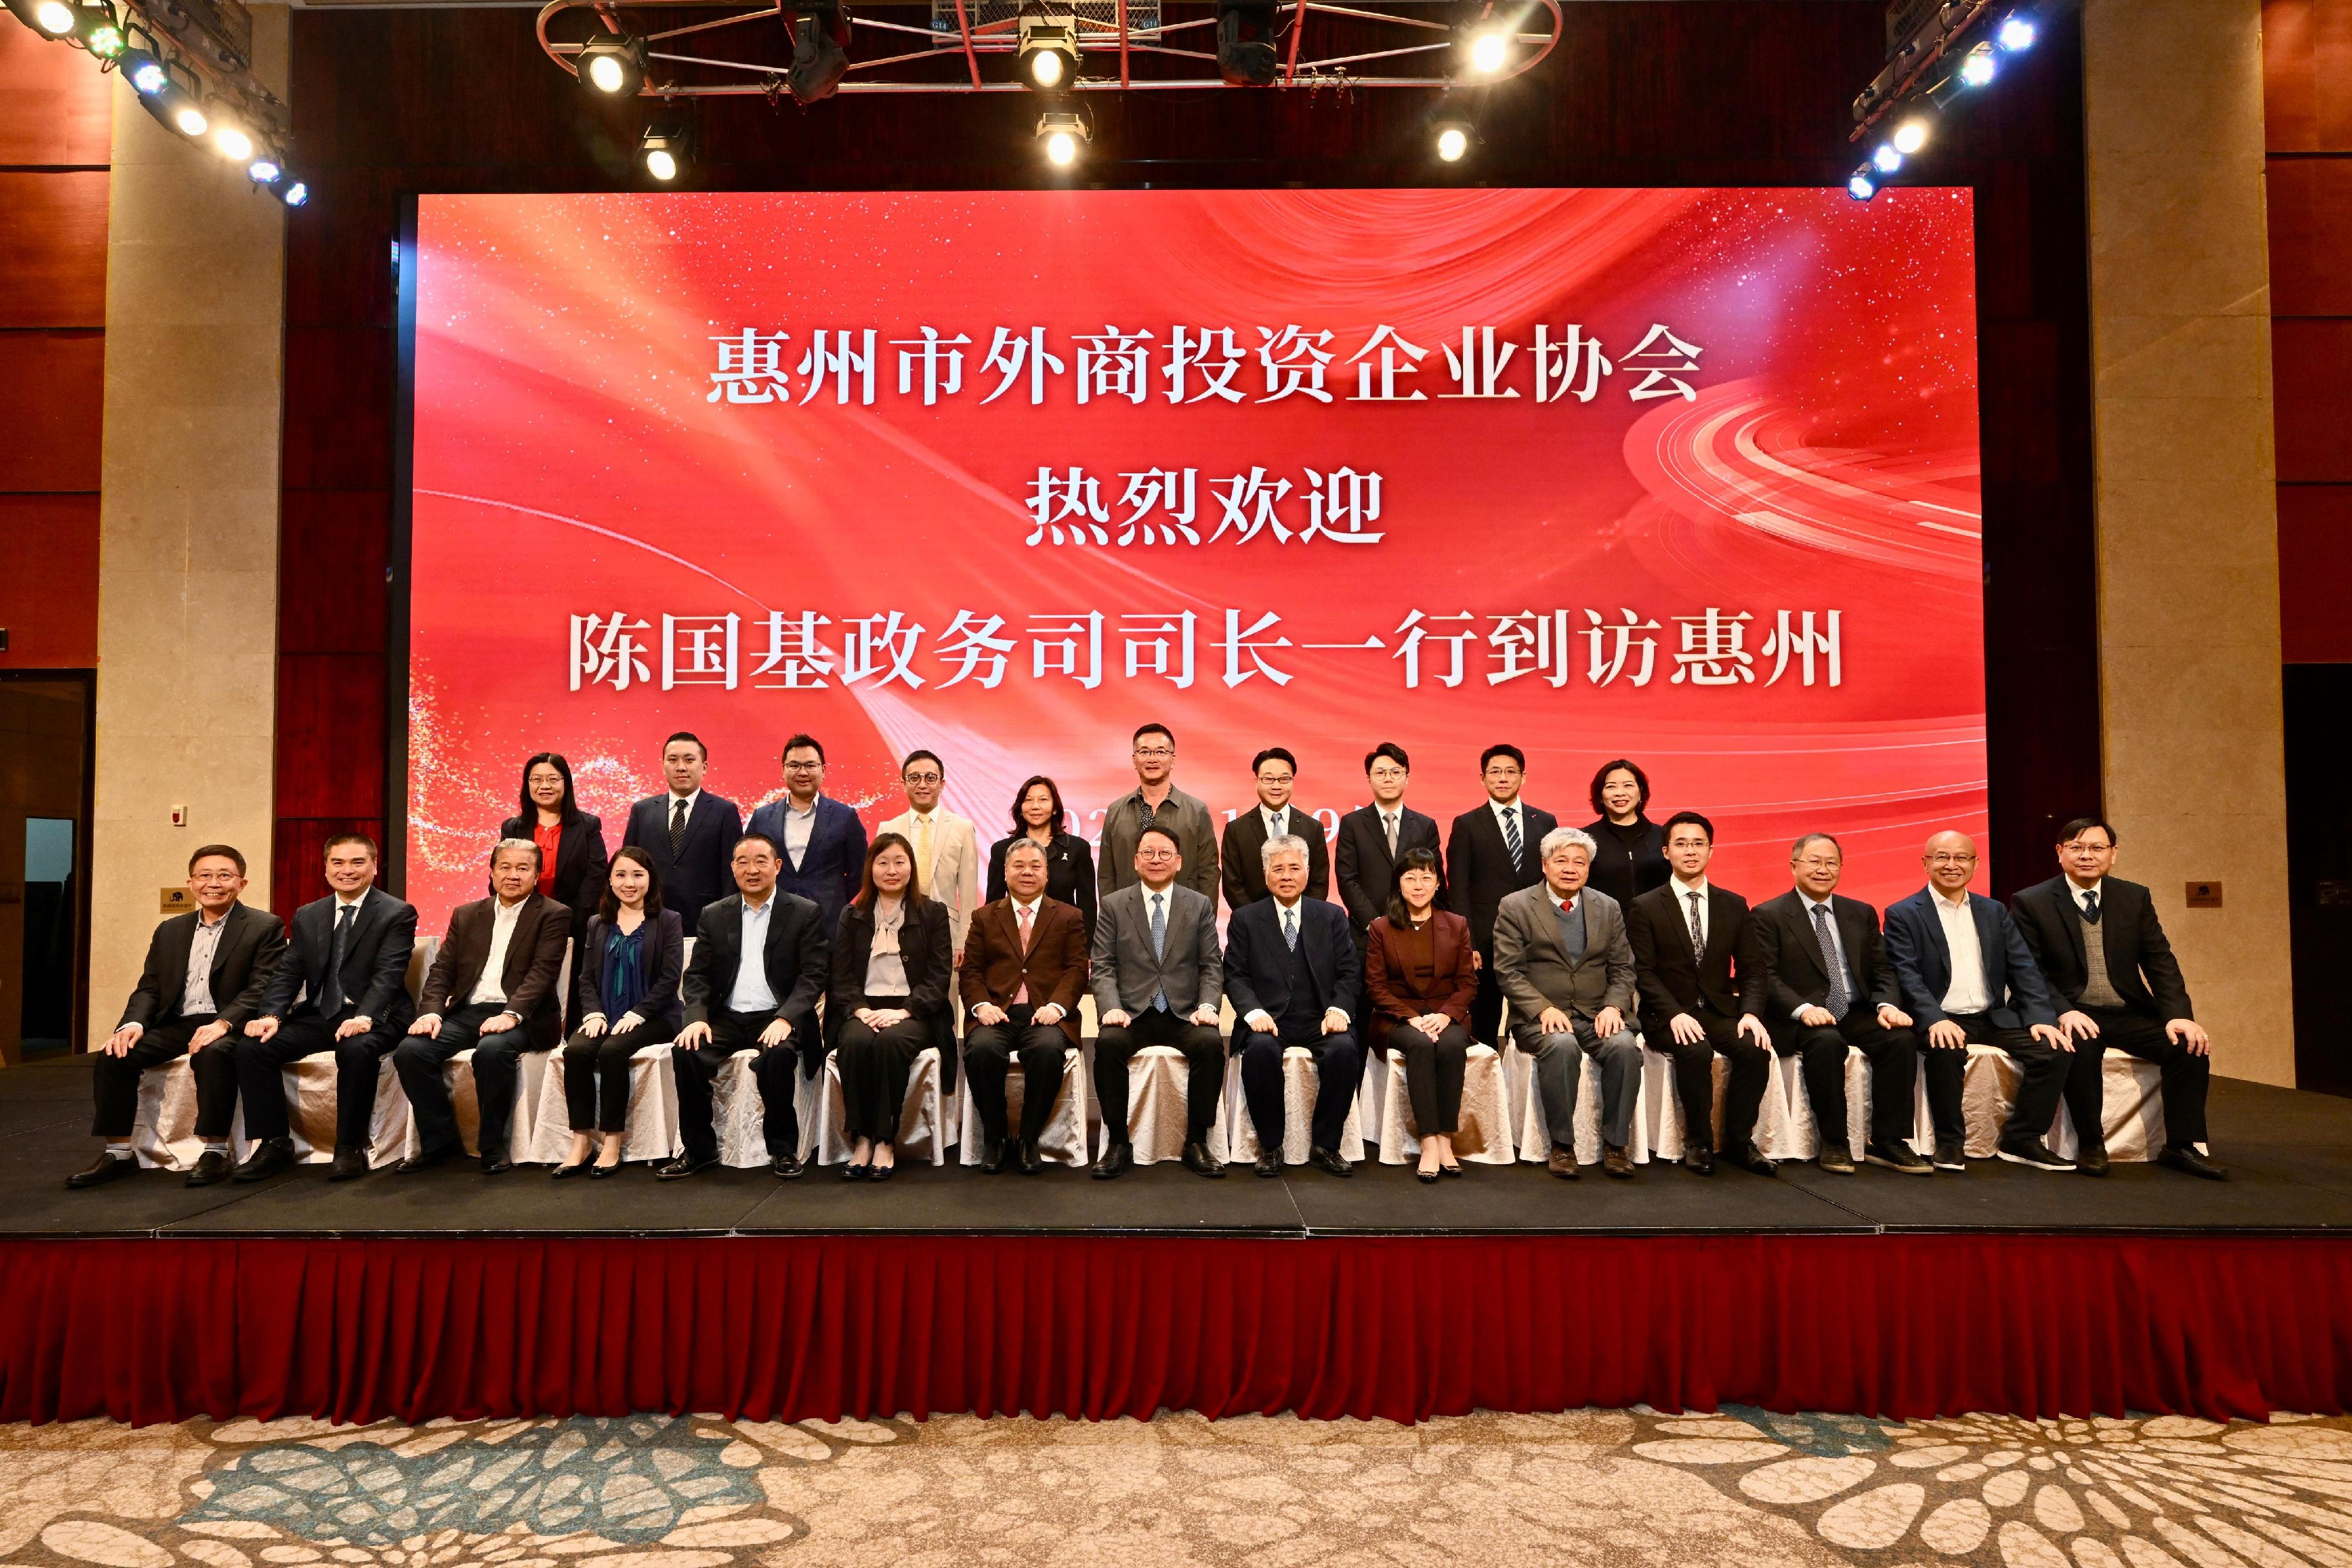 The Chief Secretary for Administration, Mr Chan Kwok-ki, continued his visit to Mainland cities of the Guangdong-Hong Kong-Macao Greater Bay Area in Guangzhou and Huizhou today (January 9). Photo shows Mr Chan (front row, centre), the President of the Huizhou Association of Enterprises with Foreign Investment, Mr Yeung Chun-fan (front row, seventh right) and other guests at a lunch hosted by the Huizhou Association of Enterprises with Foreign Investment.